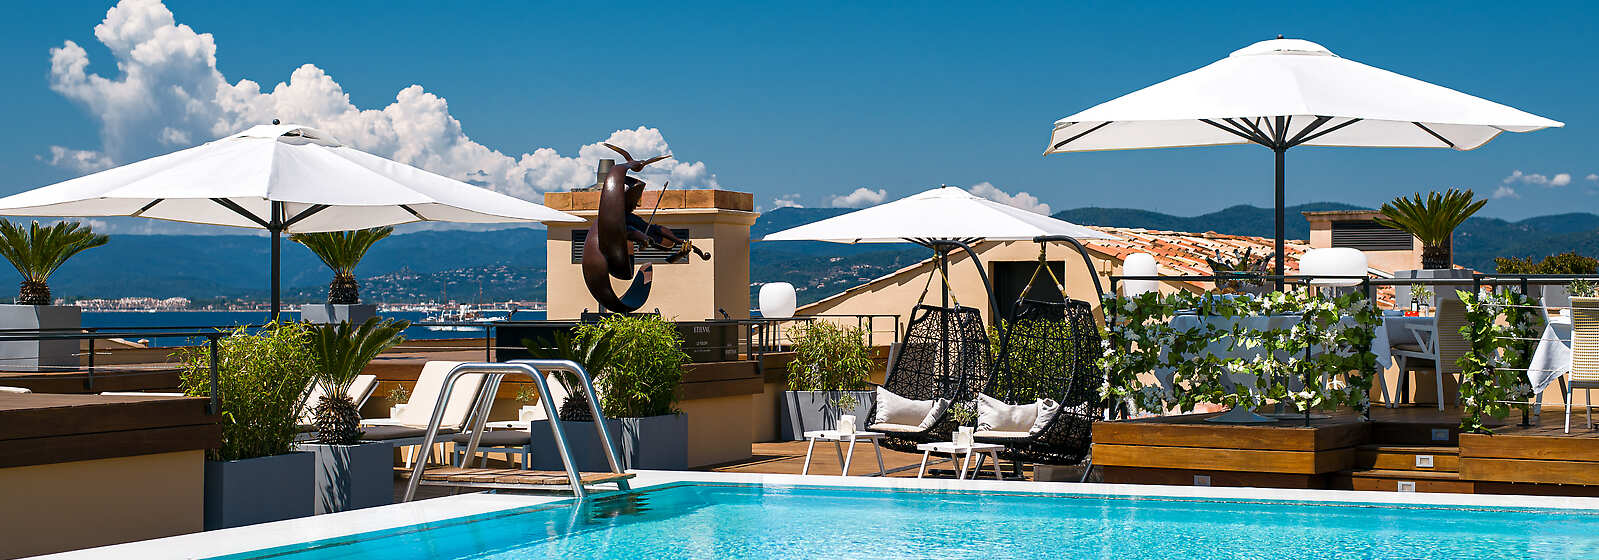 Cheval Blanc Hotel and Room Review in Saint Tropez! Walk-Thru of a Sea View  Room -Impeccable Service 